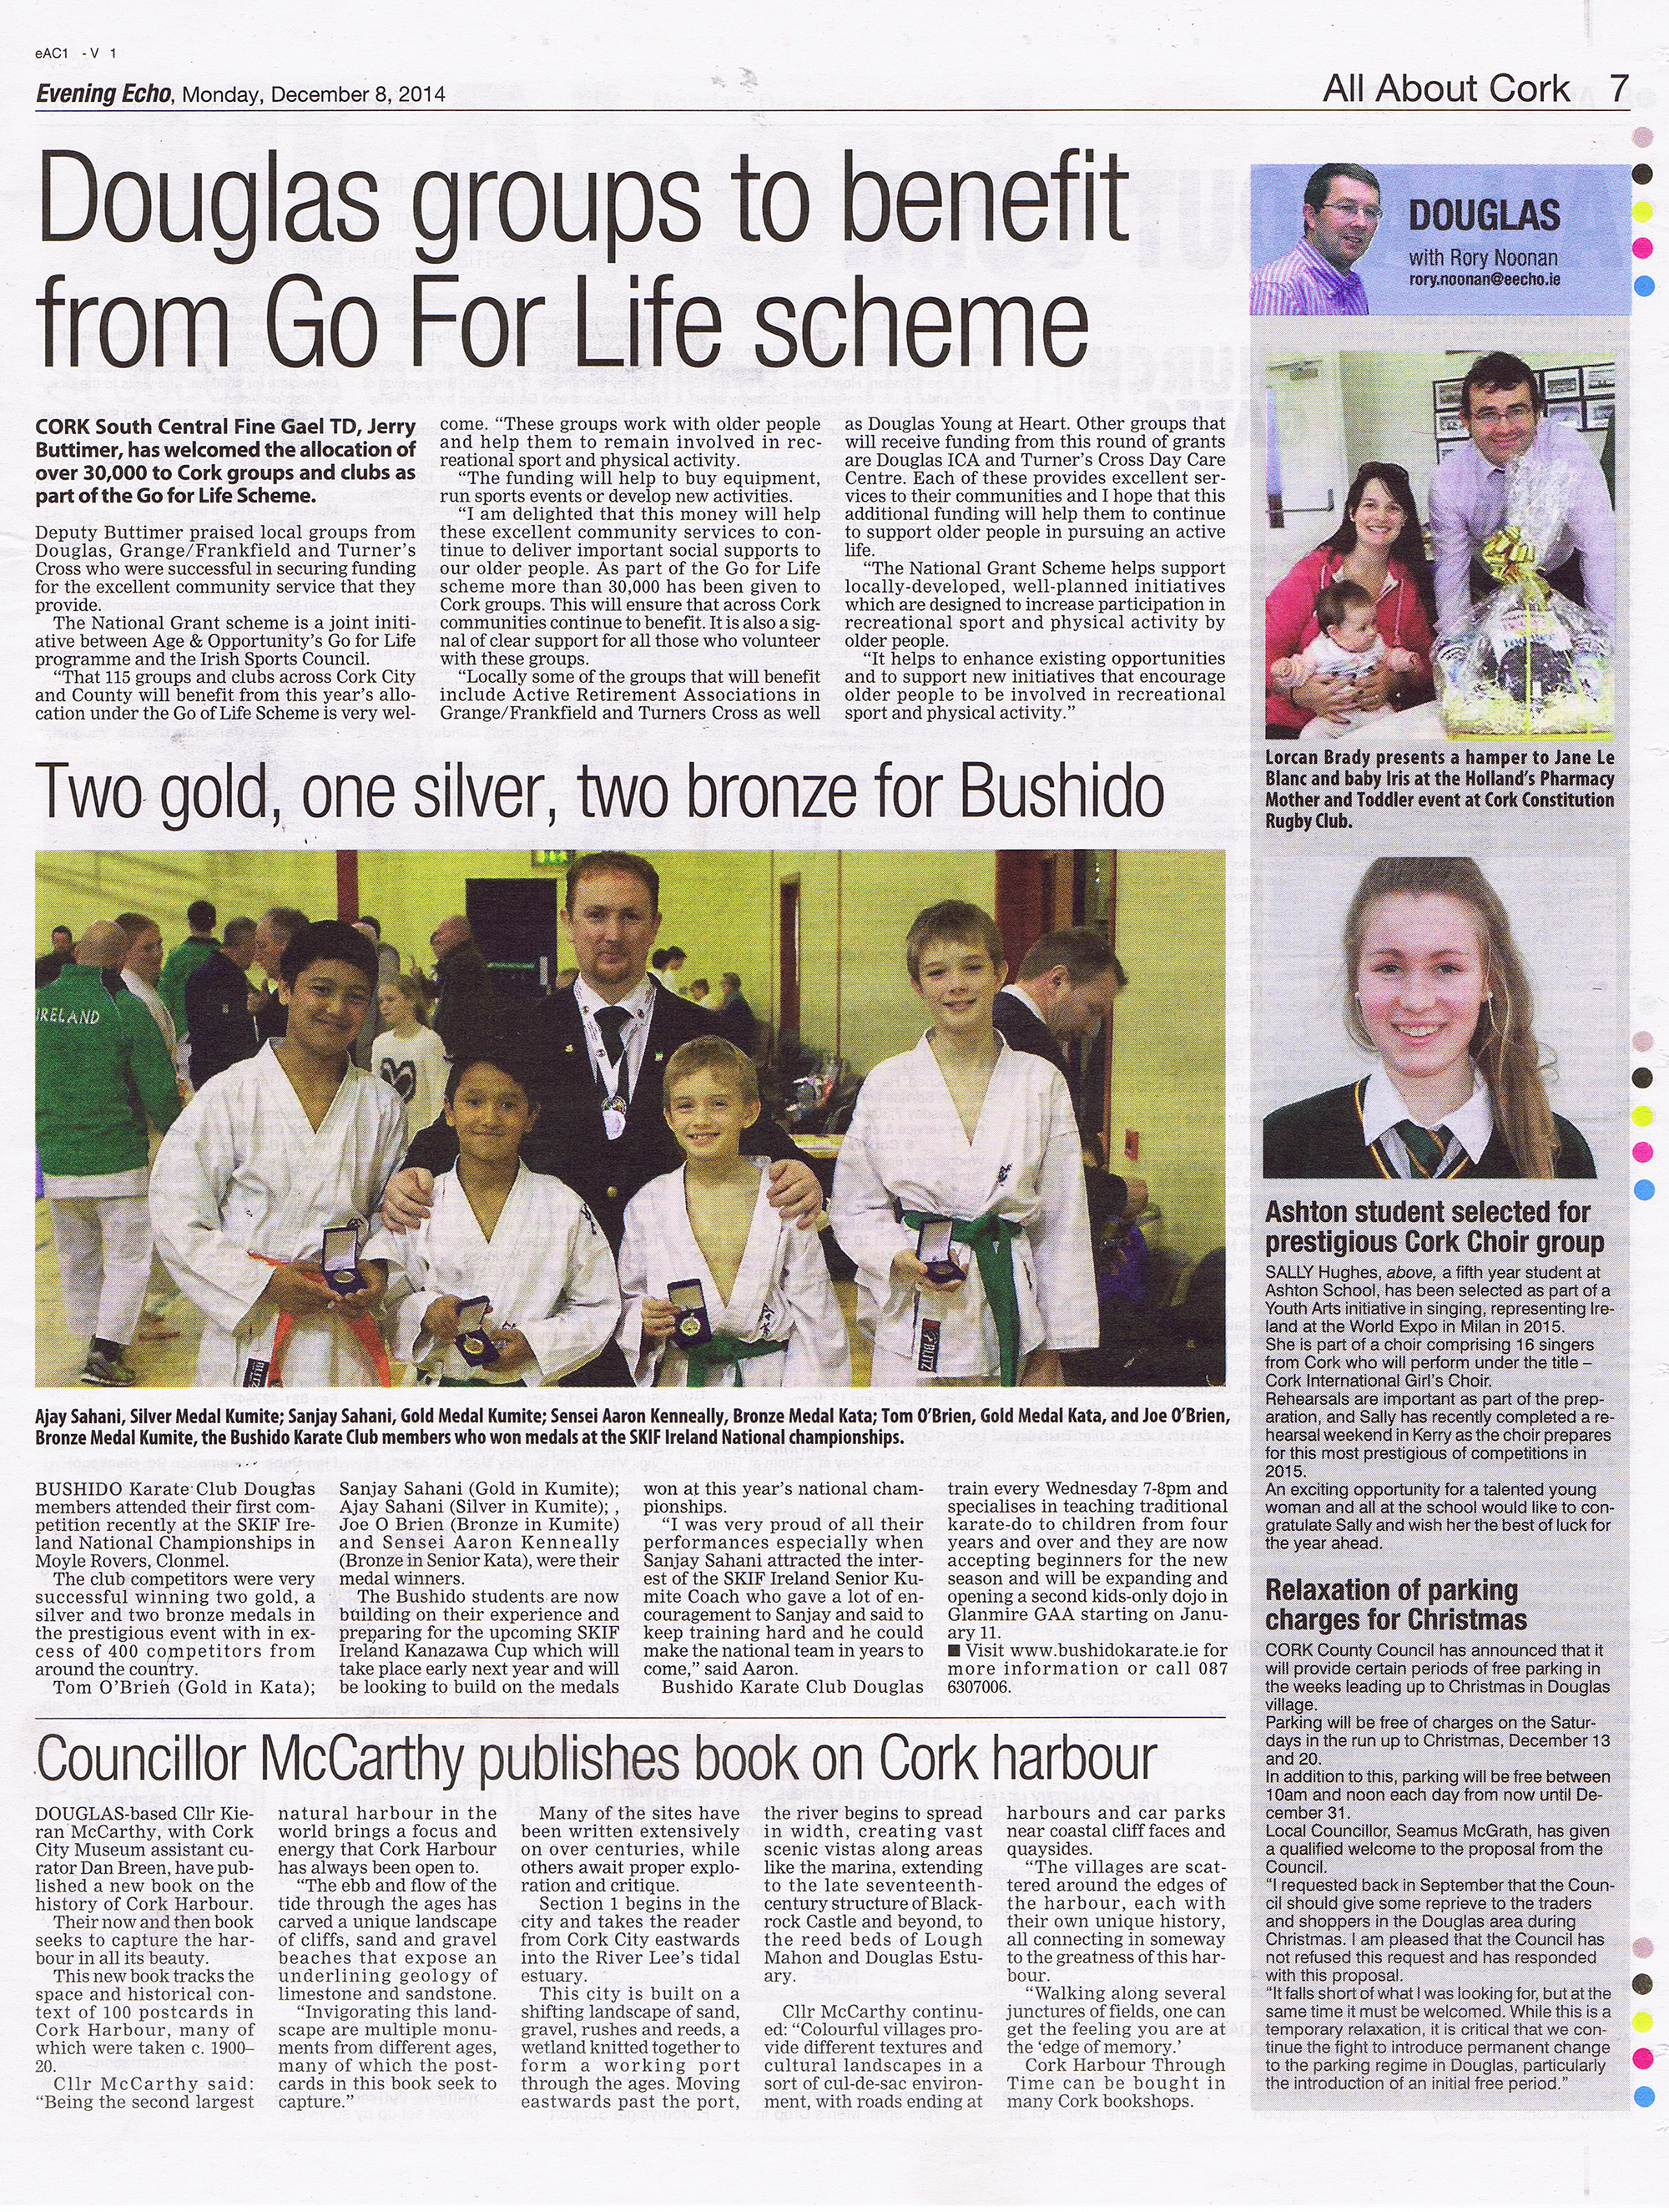 Evening Echo Feature - Two Gold, One Silver, Two Bronze for Bushido at All Ireland Championships